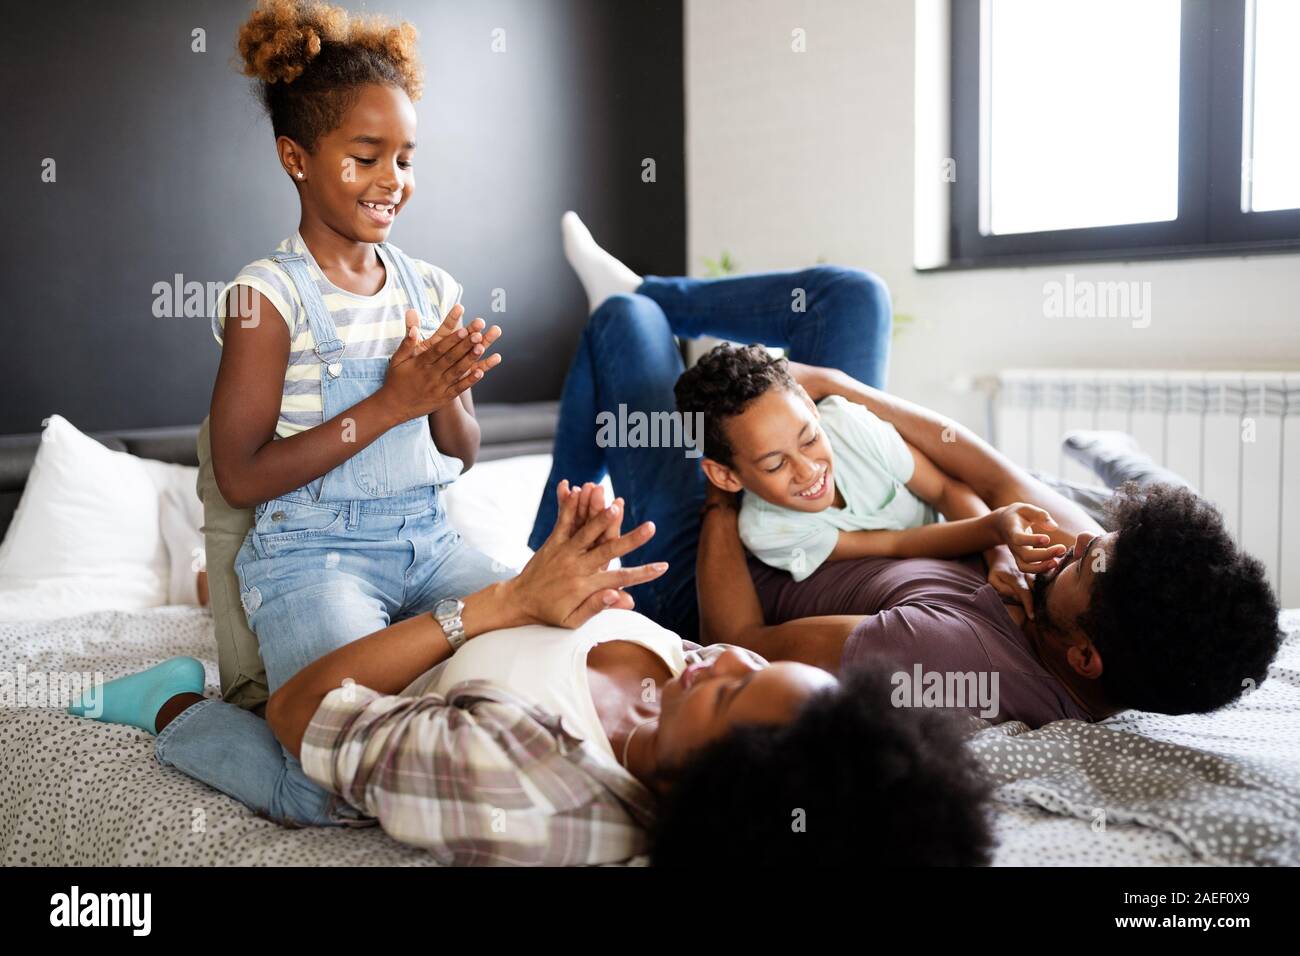 Young family being playful and spending fun time together at home Stock Photo